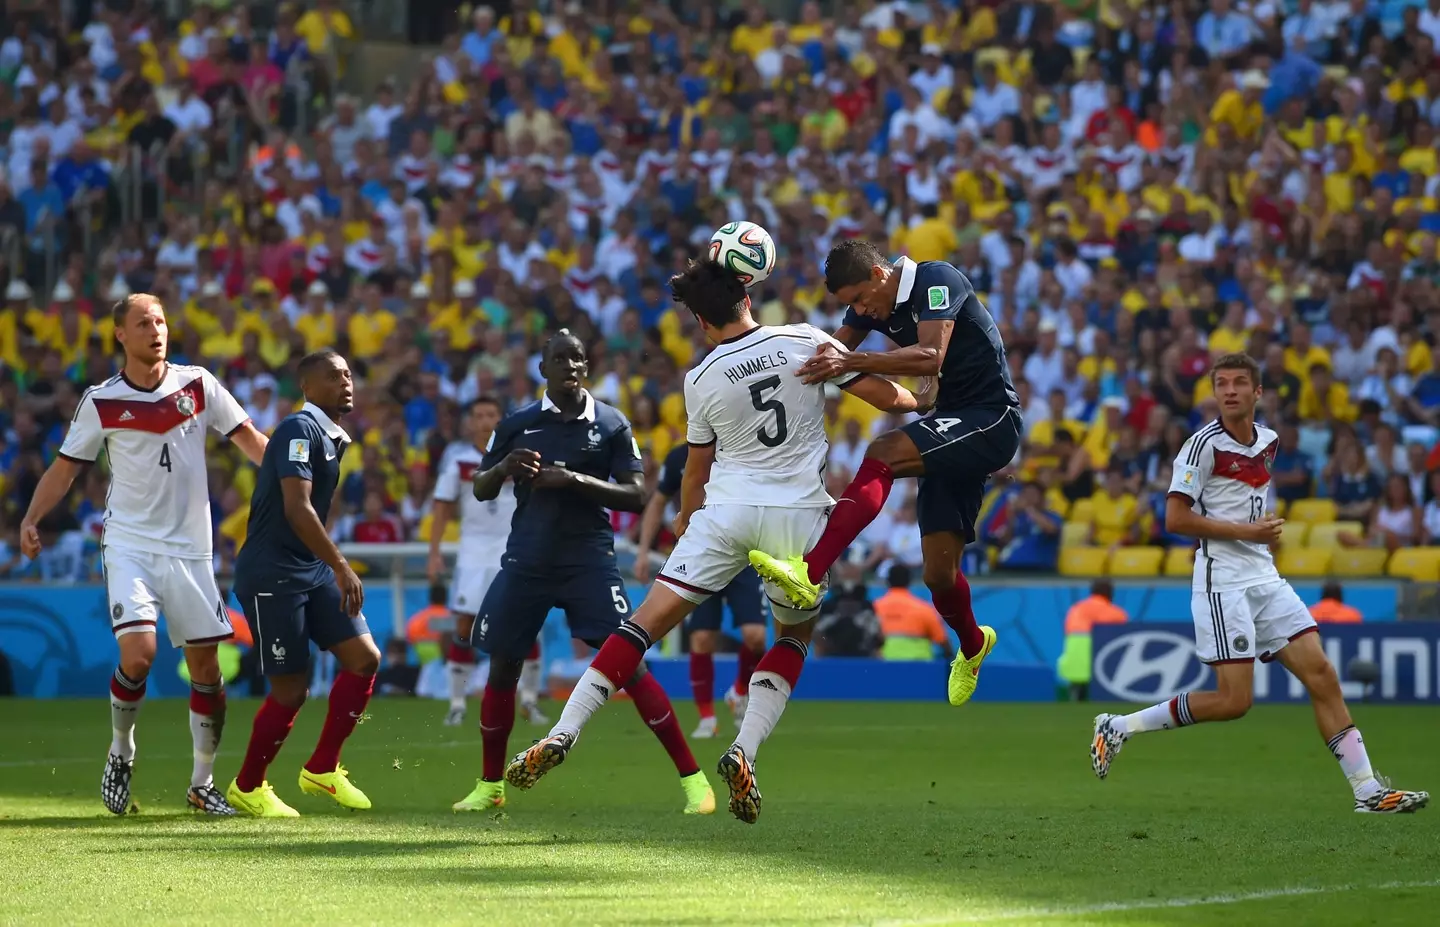 Mats Hummels and Raphael Varane challenge for an aerial ball. Image: Getty